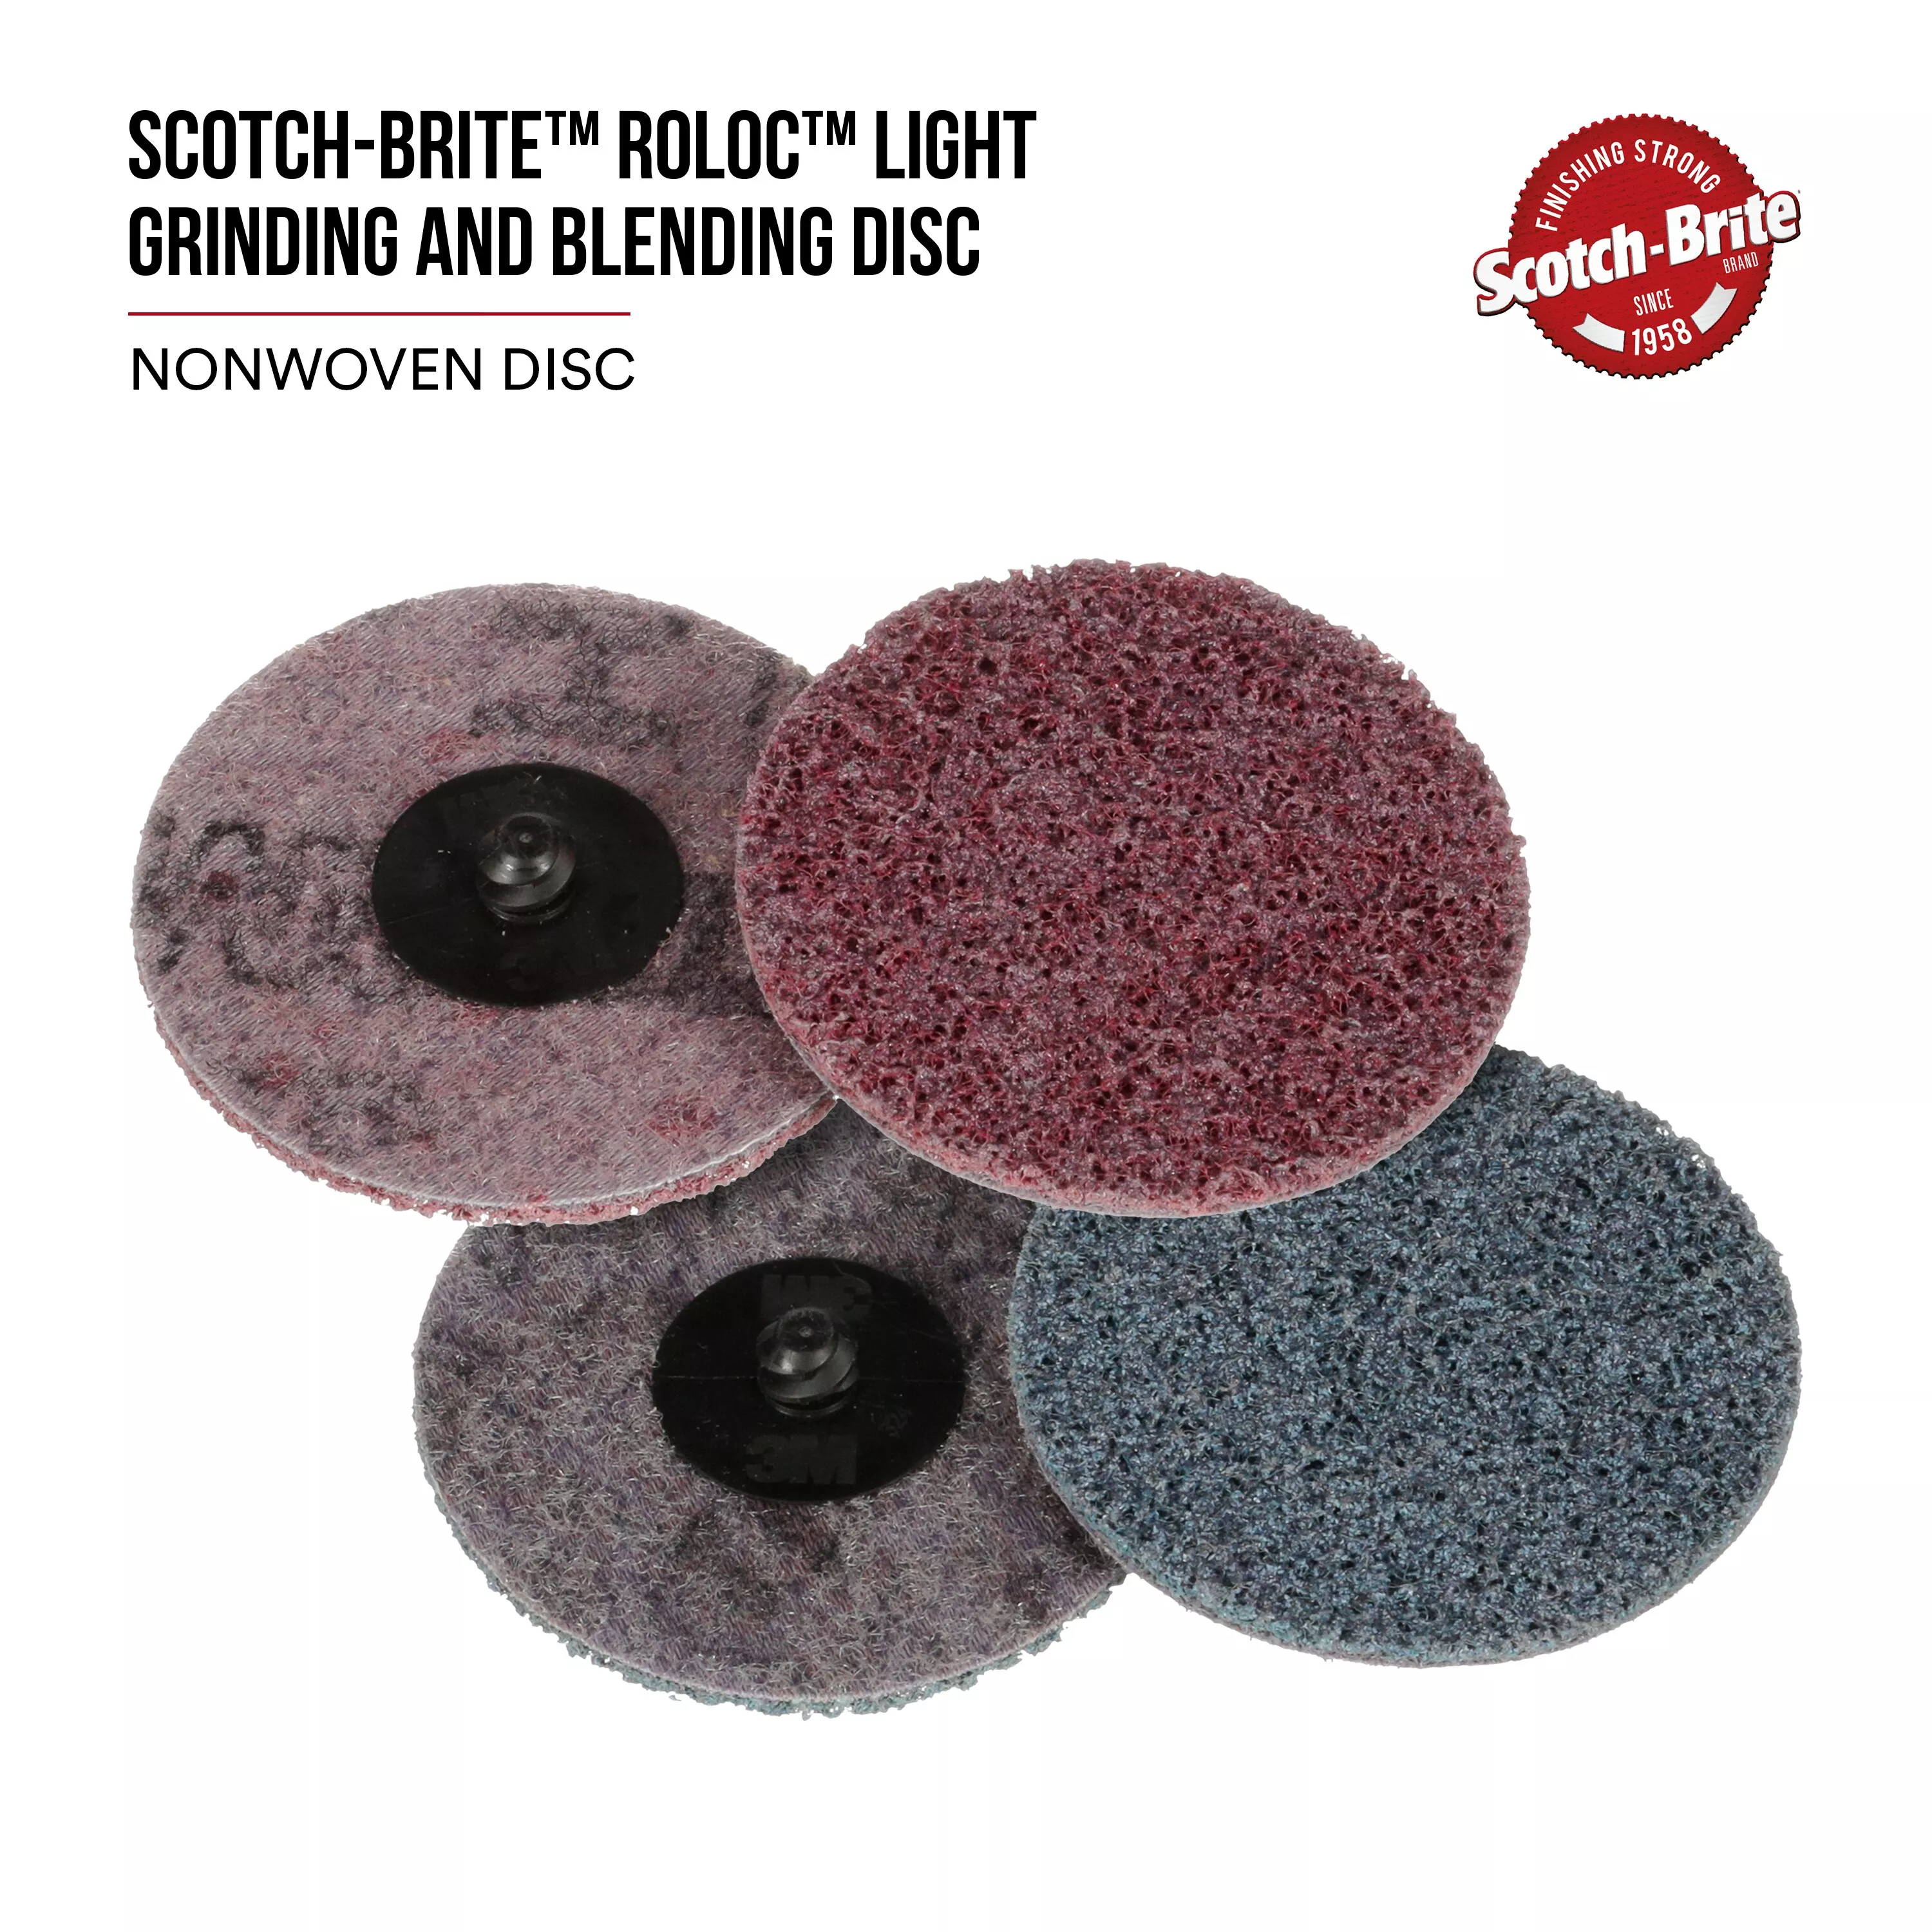 Product Number GB-DR | Scotch-Brite™ Roloc™ Light Grinding and Blending Disc